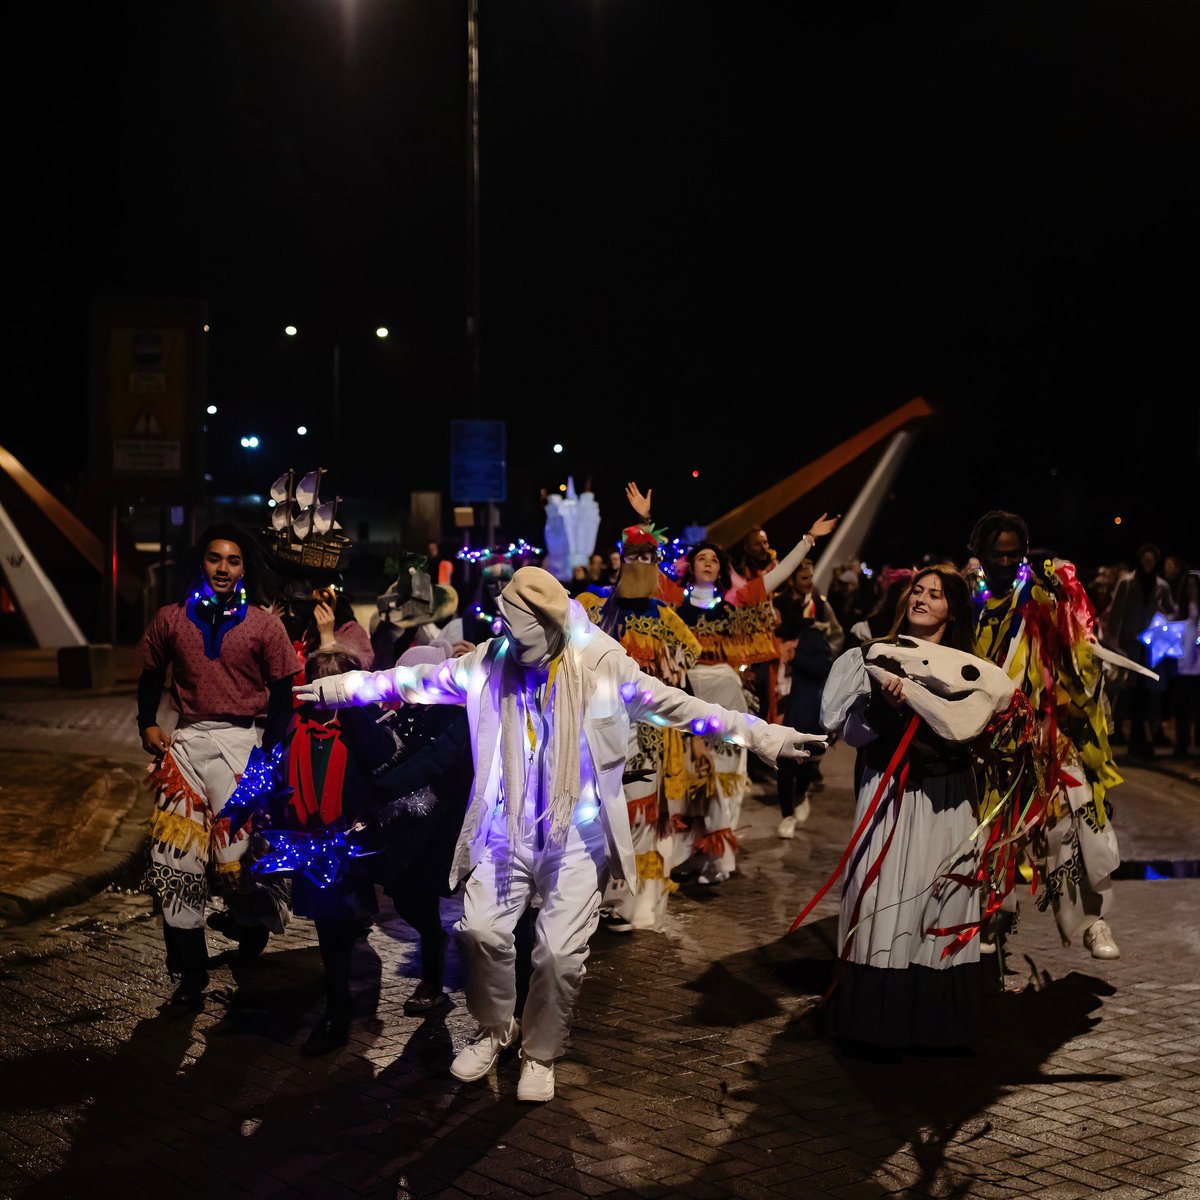 Butetown Carnival at @theatrbydbach - a joyful performance, short parade + a lively jamming session. 24/3/24 This reimagined winter showcase includes a vibrant fusion of a traditional Mari Lwyd with a jazzy Brazilian twist. smallworld.org.uk/events @Arts_Wales_ @WGCulture